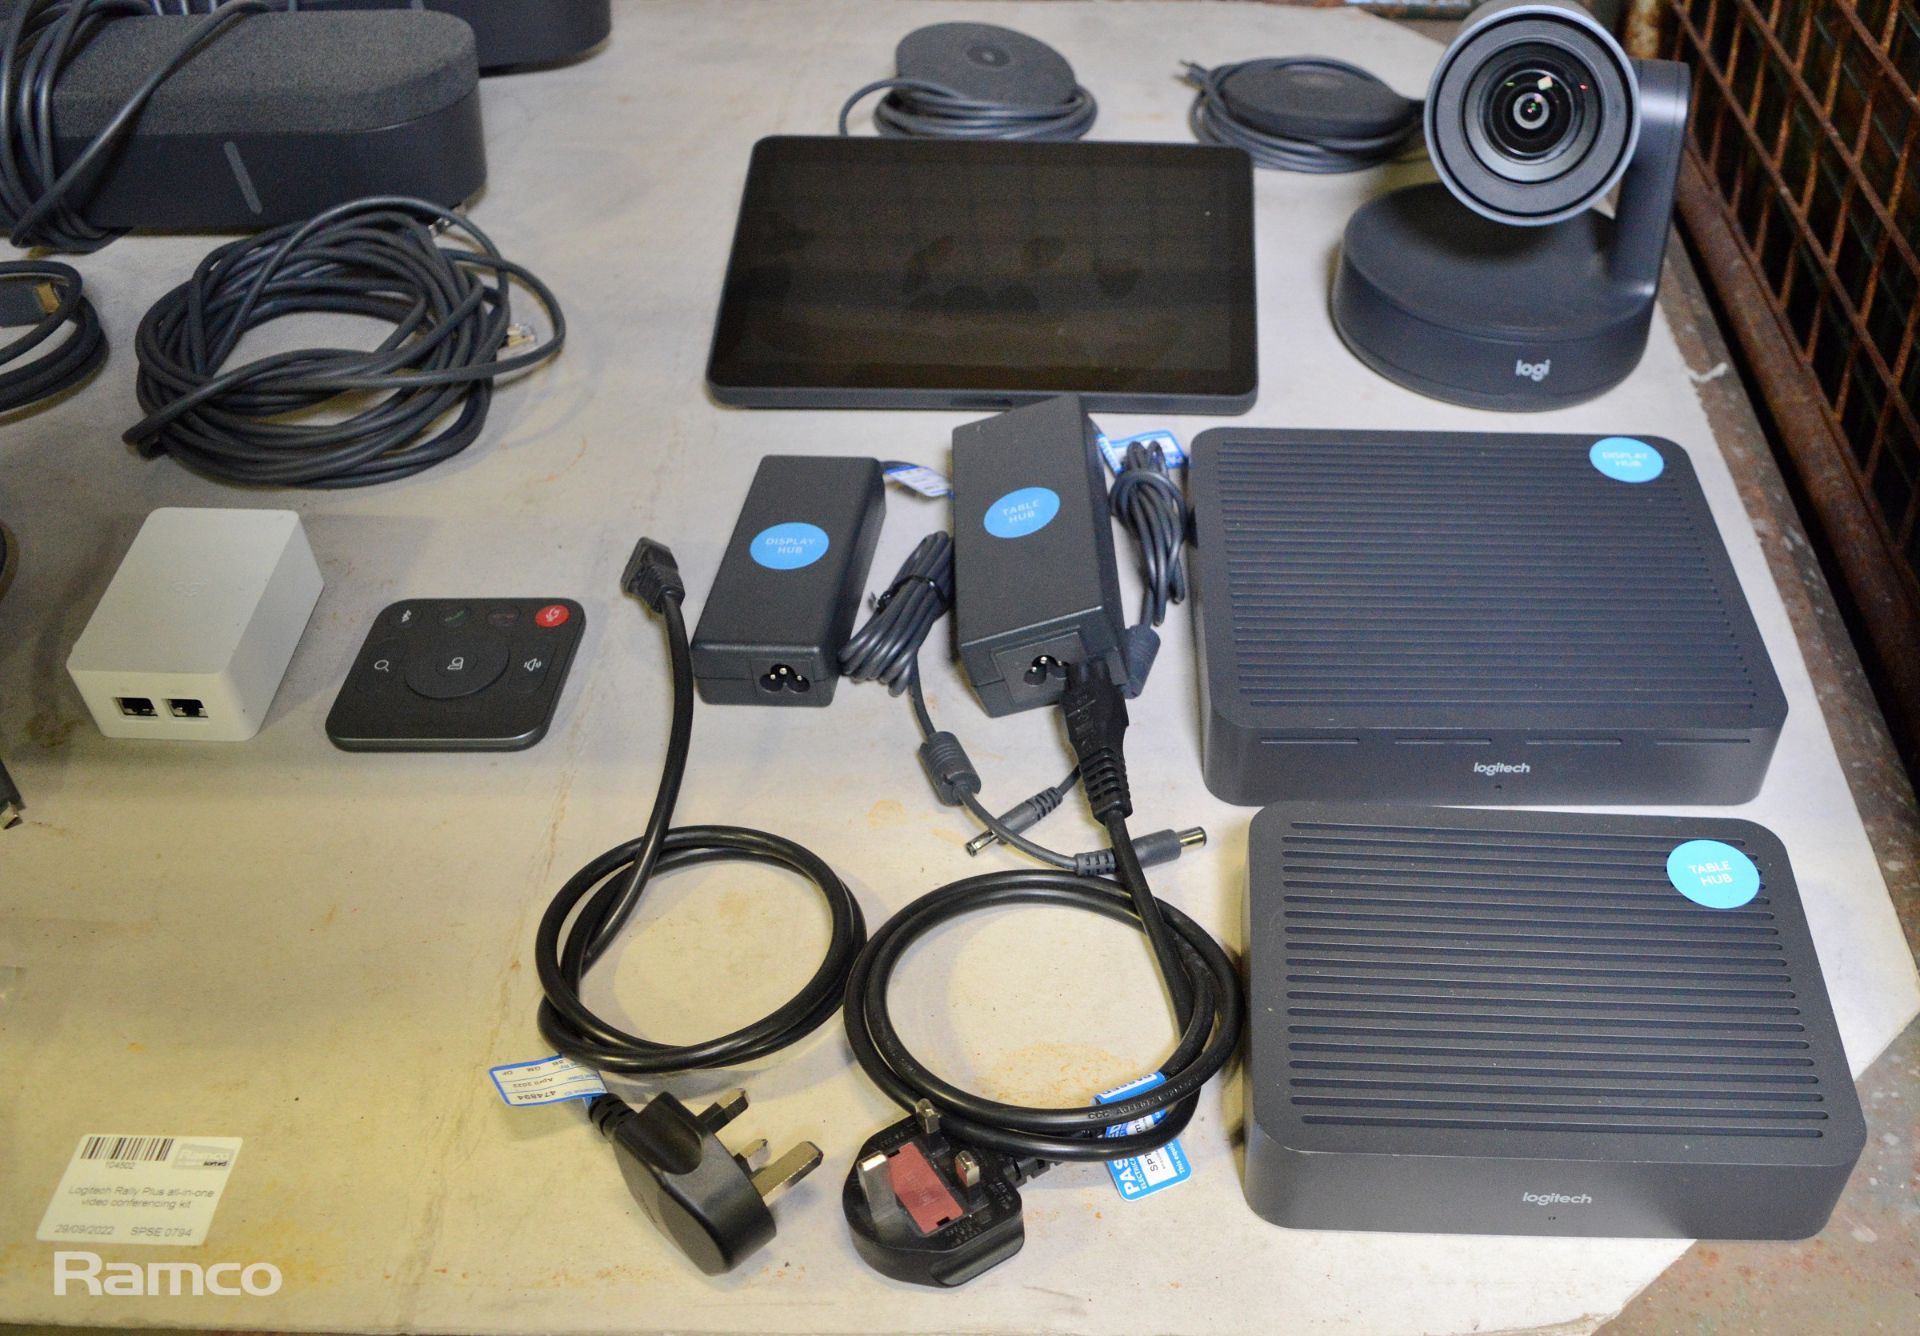 Logitech Rally Plus all-in-one video conferencing kit - cables, speakers - Image 5 of 6